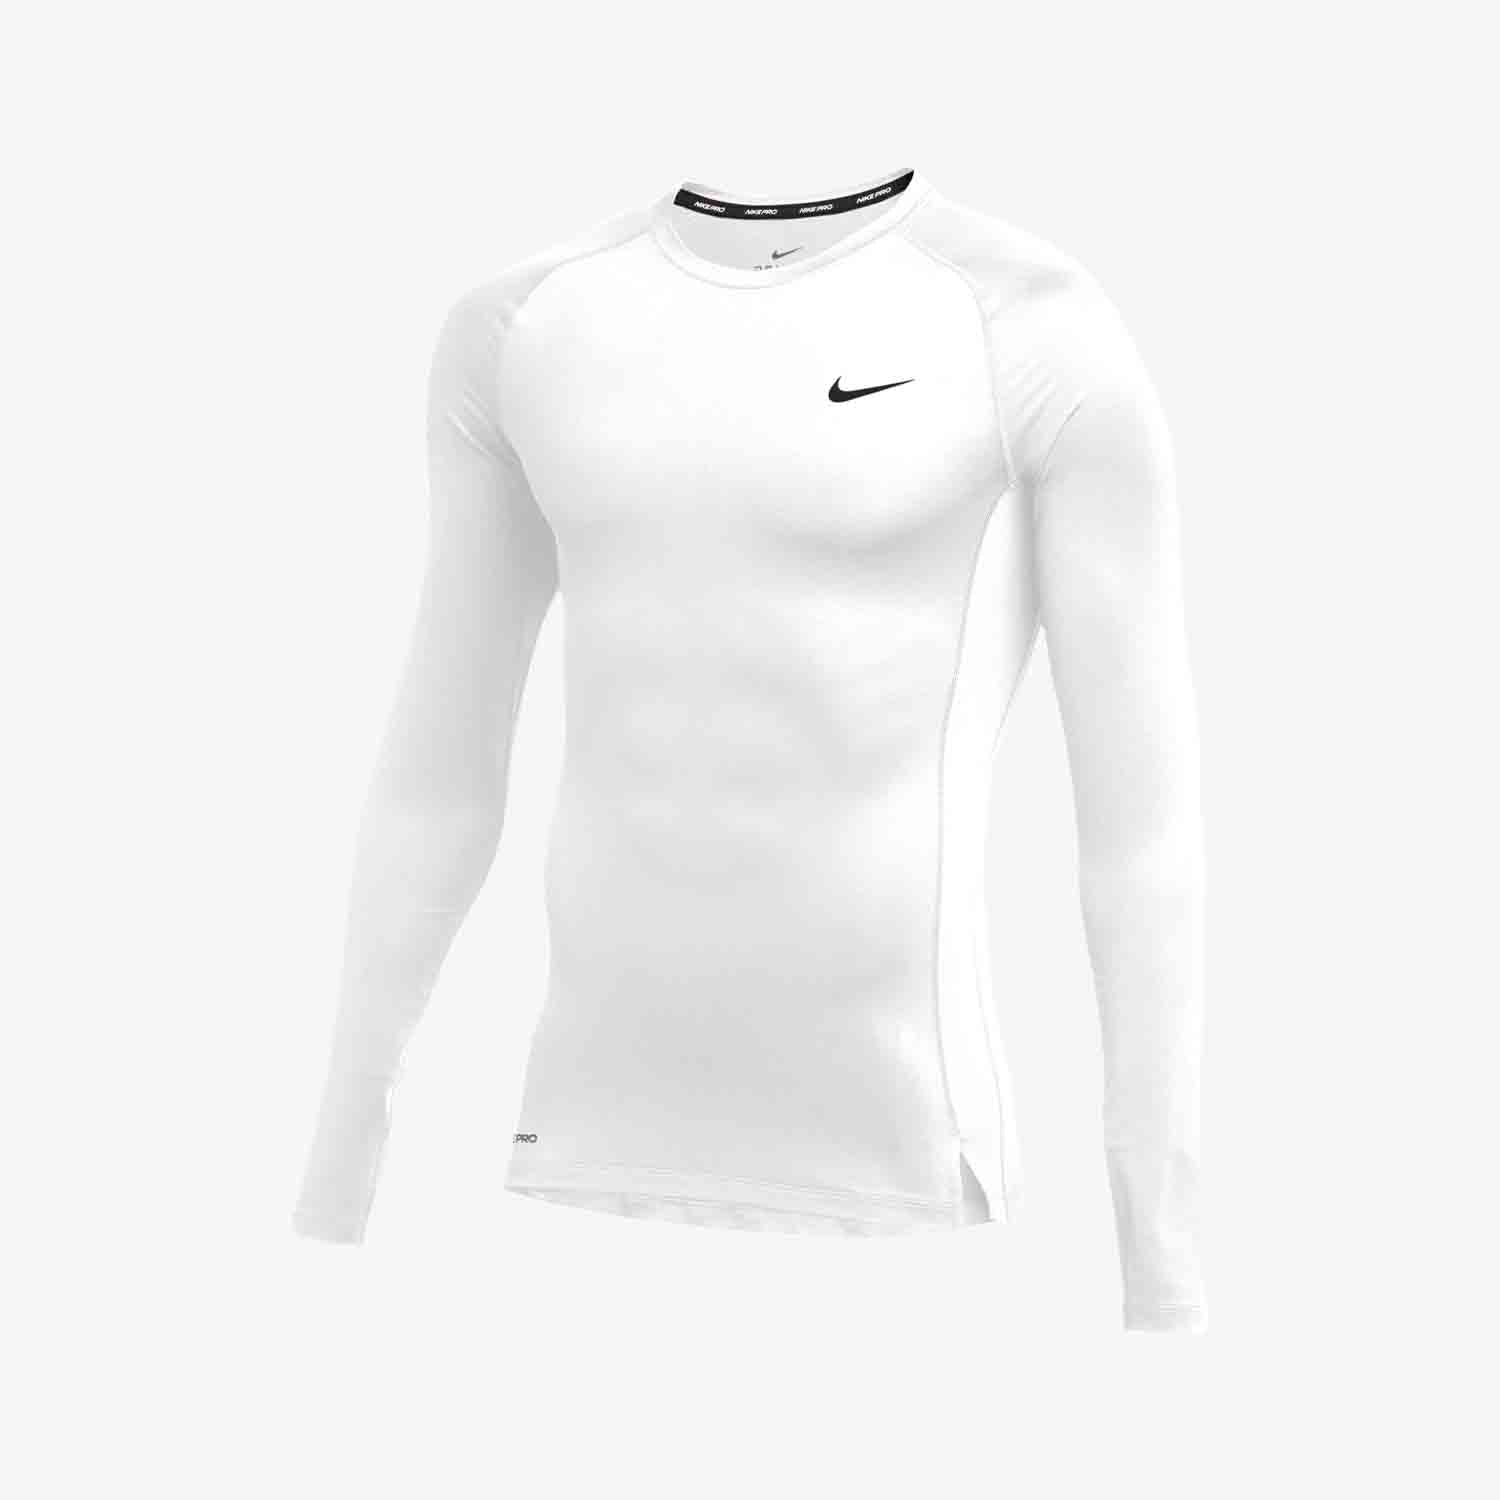 Mens Sports Compression Tops Nike